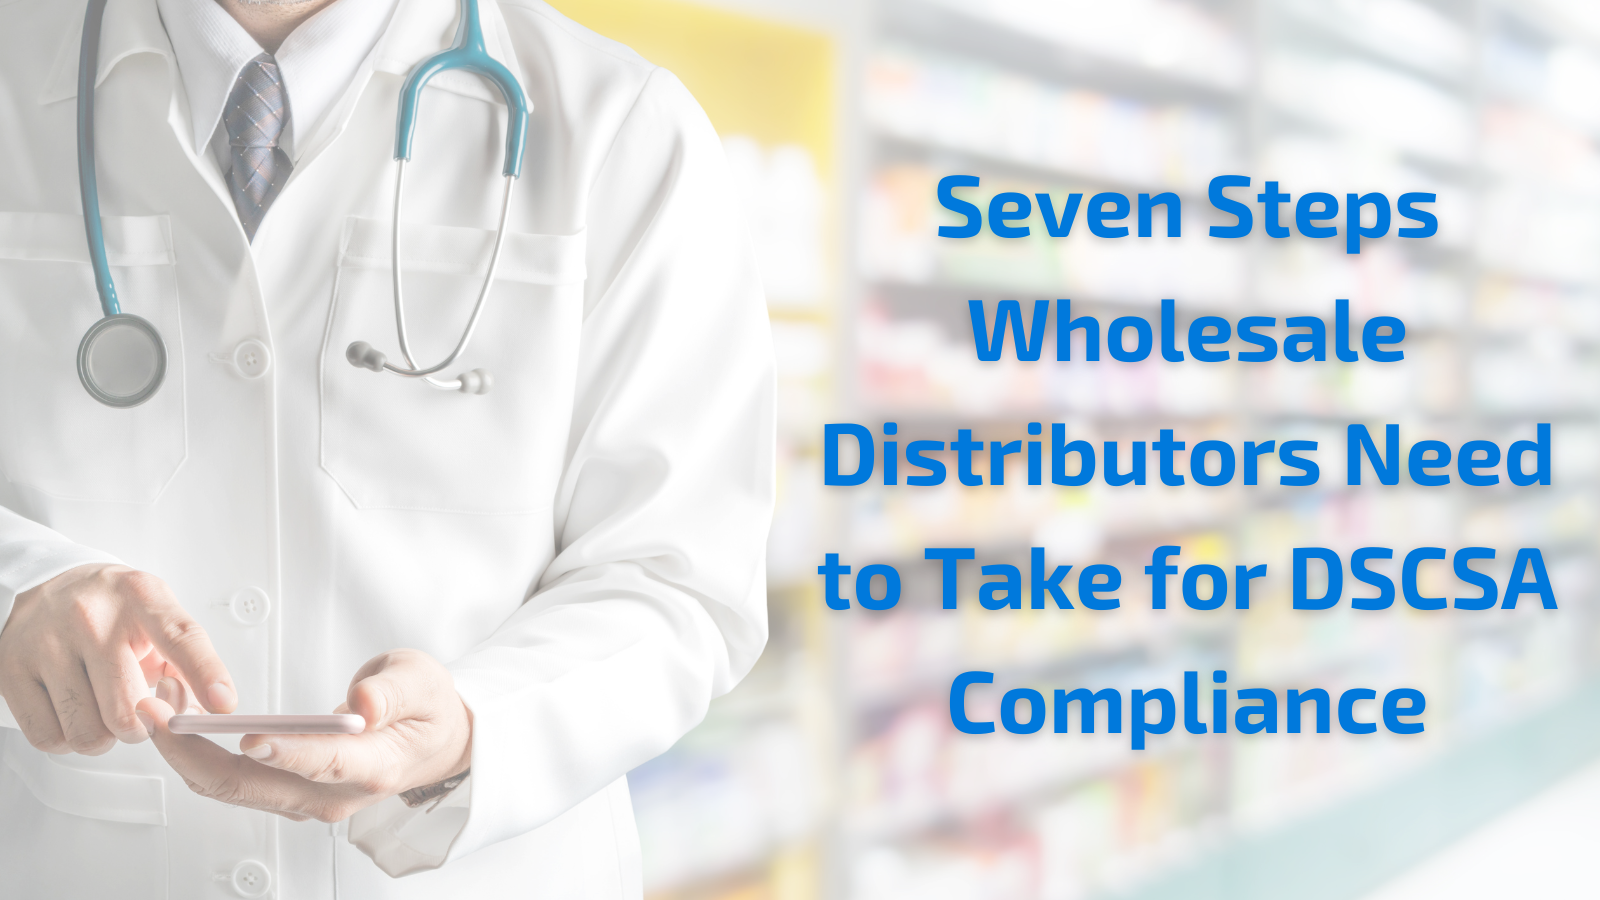 Seven Steps Wholesale Distributors Need to Take for DSCSA Compliance